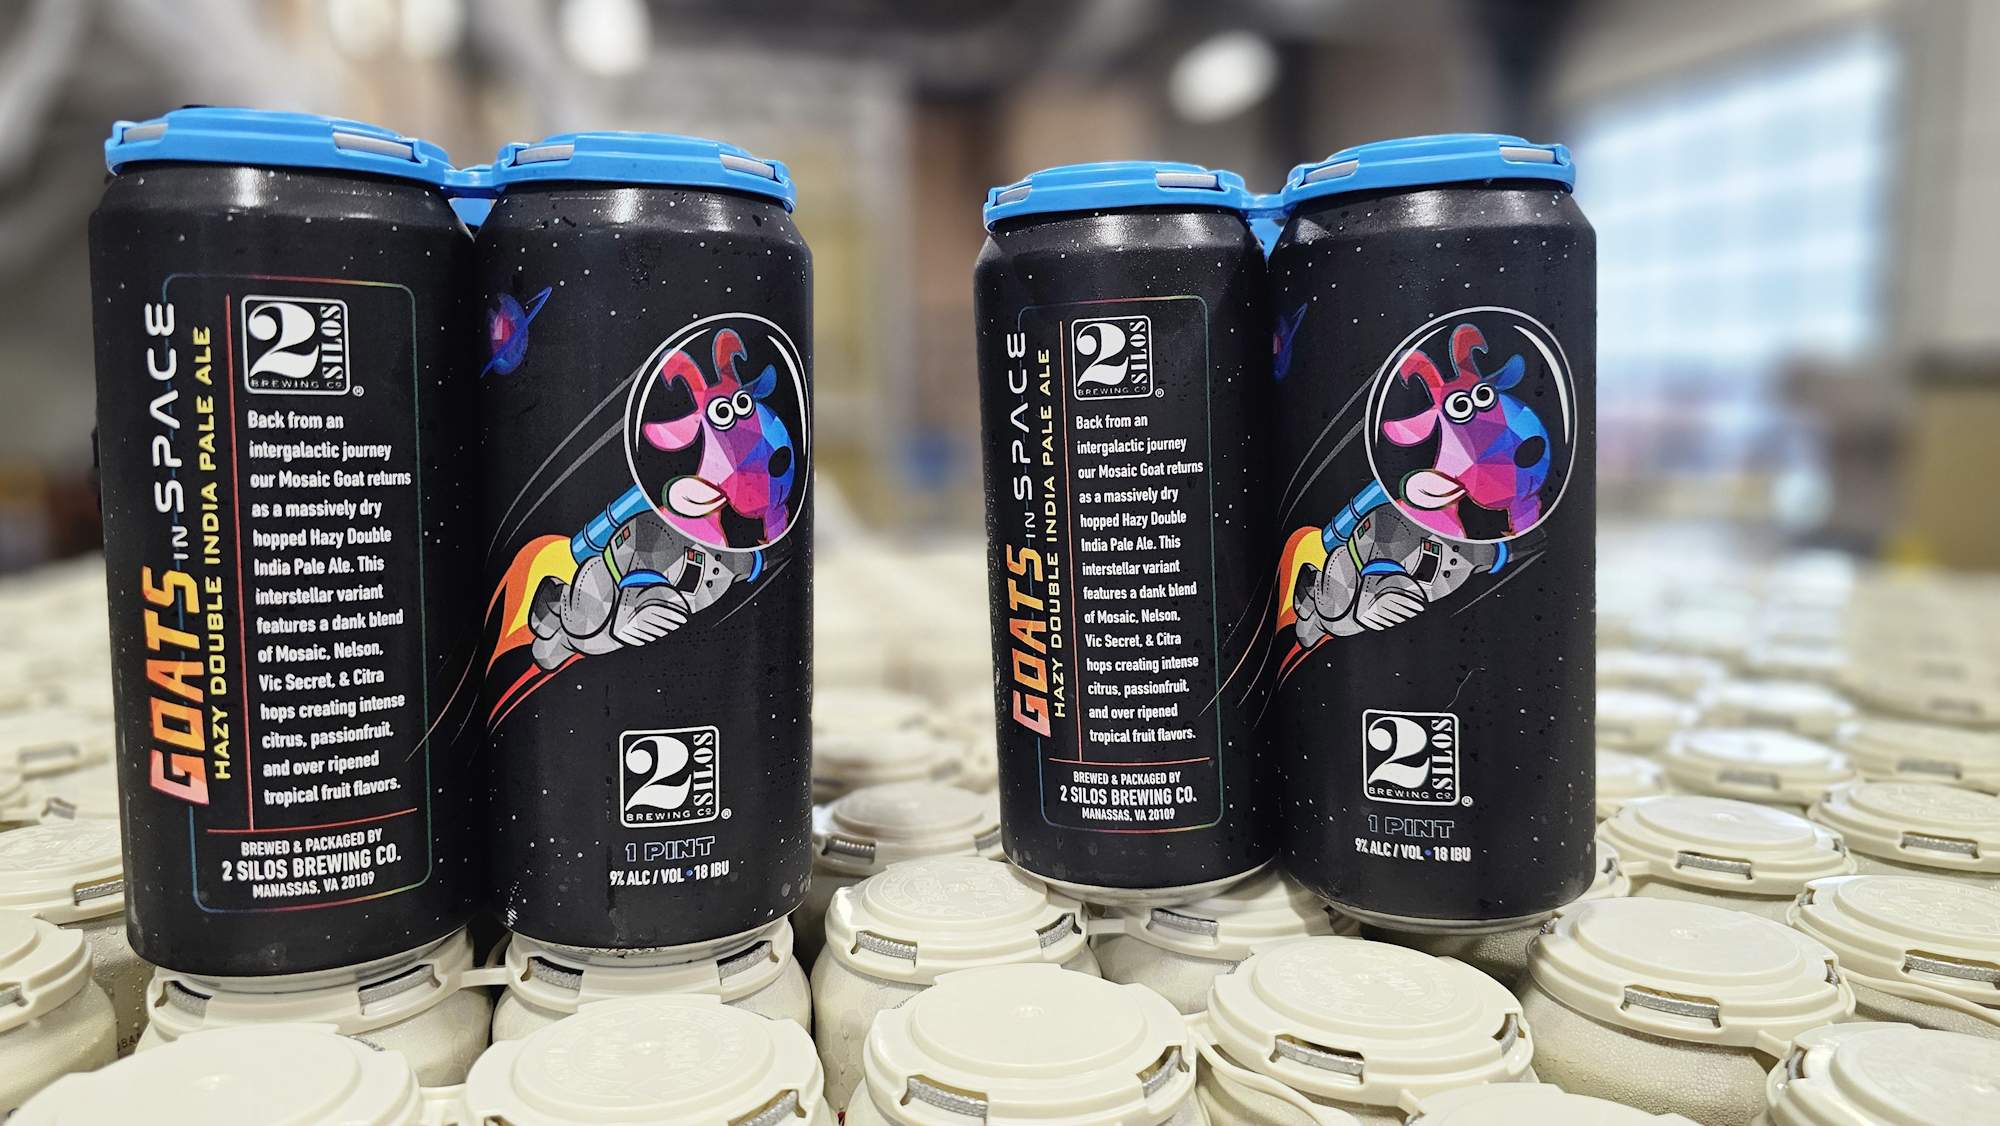 Back from an intergalactic journey our Mosaic Goat returns as a massively dry hopped Hazy Double India Pale Ale. This interstellar variant features a dank blend of Mosaic, Nelson, Vic Secret, & Citra hops creating intense citrus, passionfruit, and over ripened tropical fruit flavors.